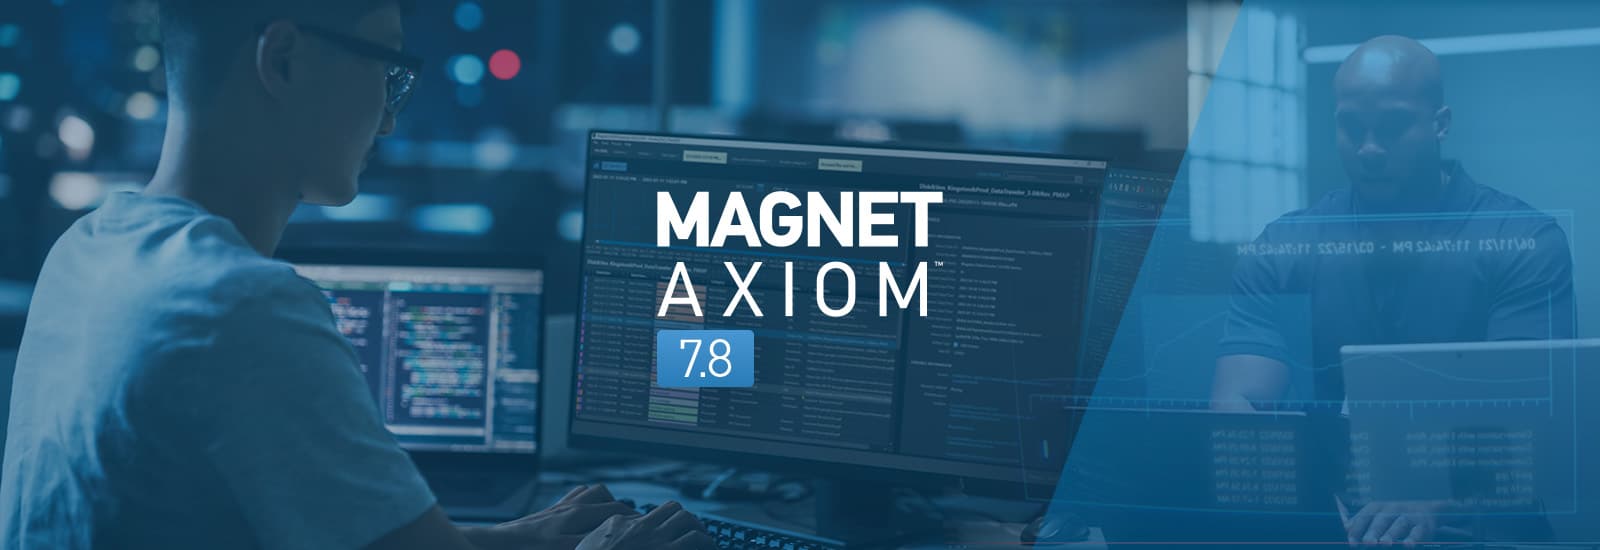 A decorative header for the Magnet AXIOM 7.8 release